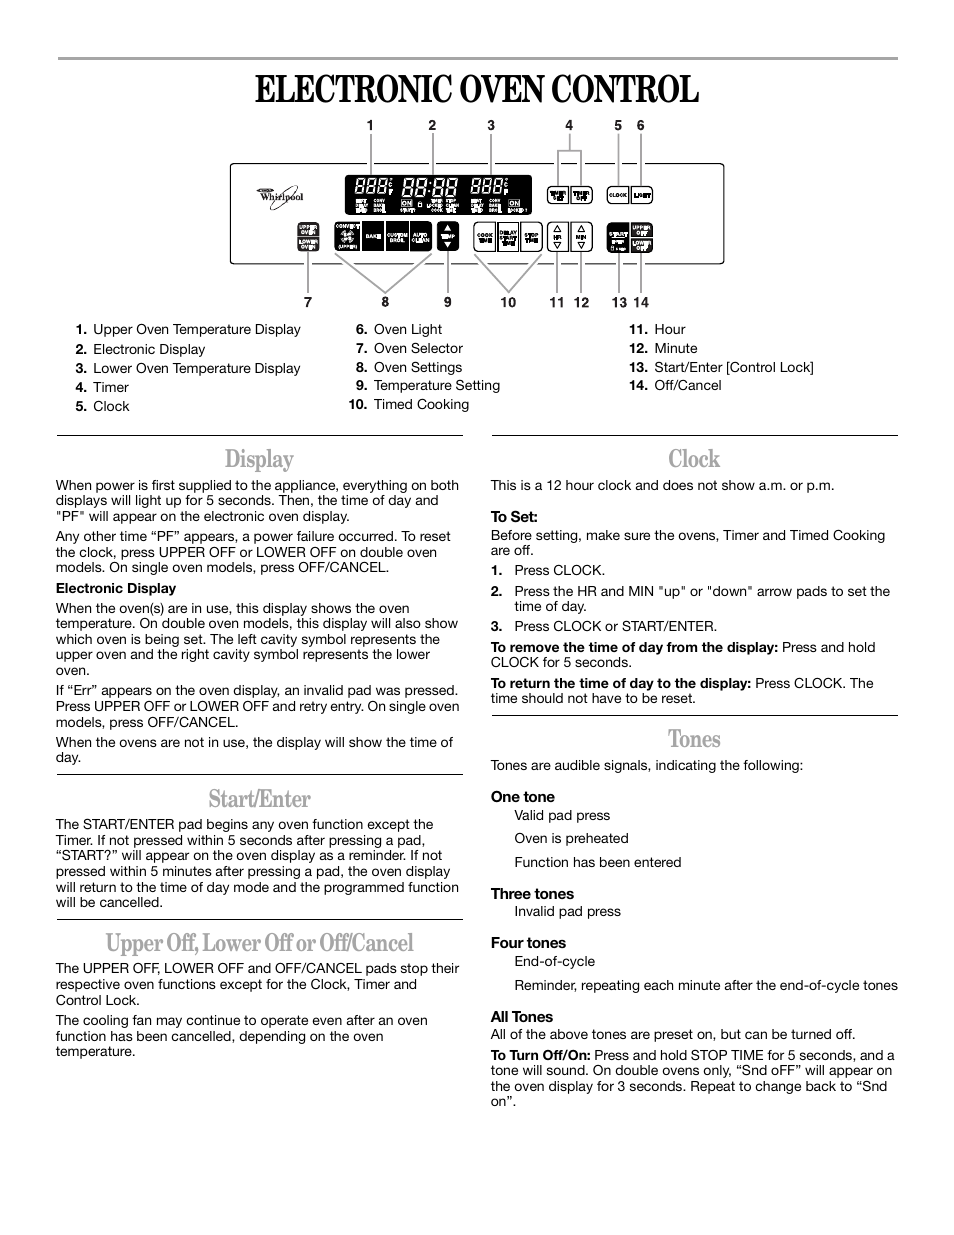 Electronic oven control, Display, Start/enter | Whirlpool GBS277 User Manual  | Page 6 / 16 | Original mode